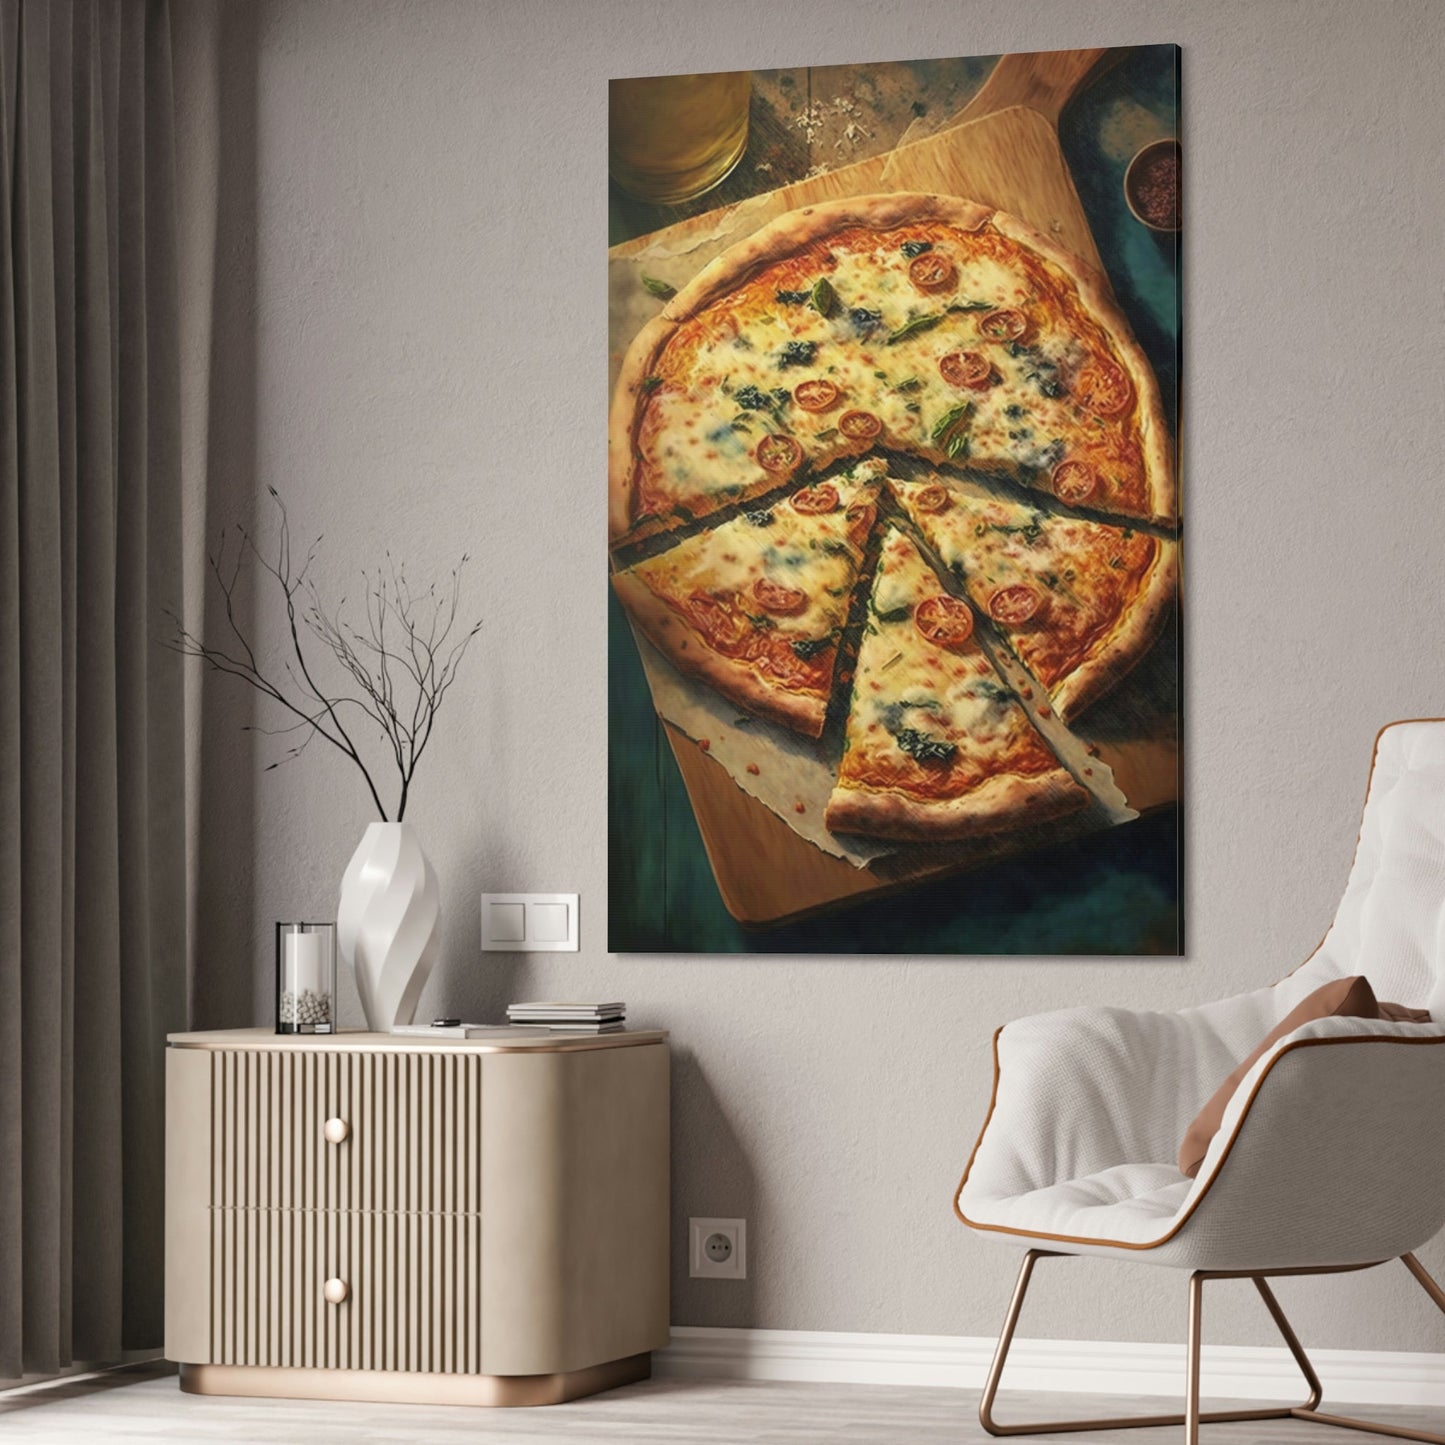 Pizza Perfection: Natural Canvas Prints of Artfully Arranged Pizza Toppings